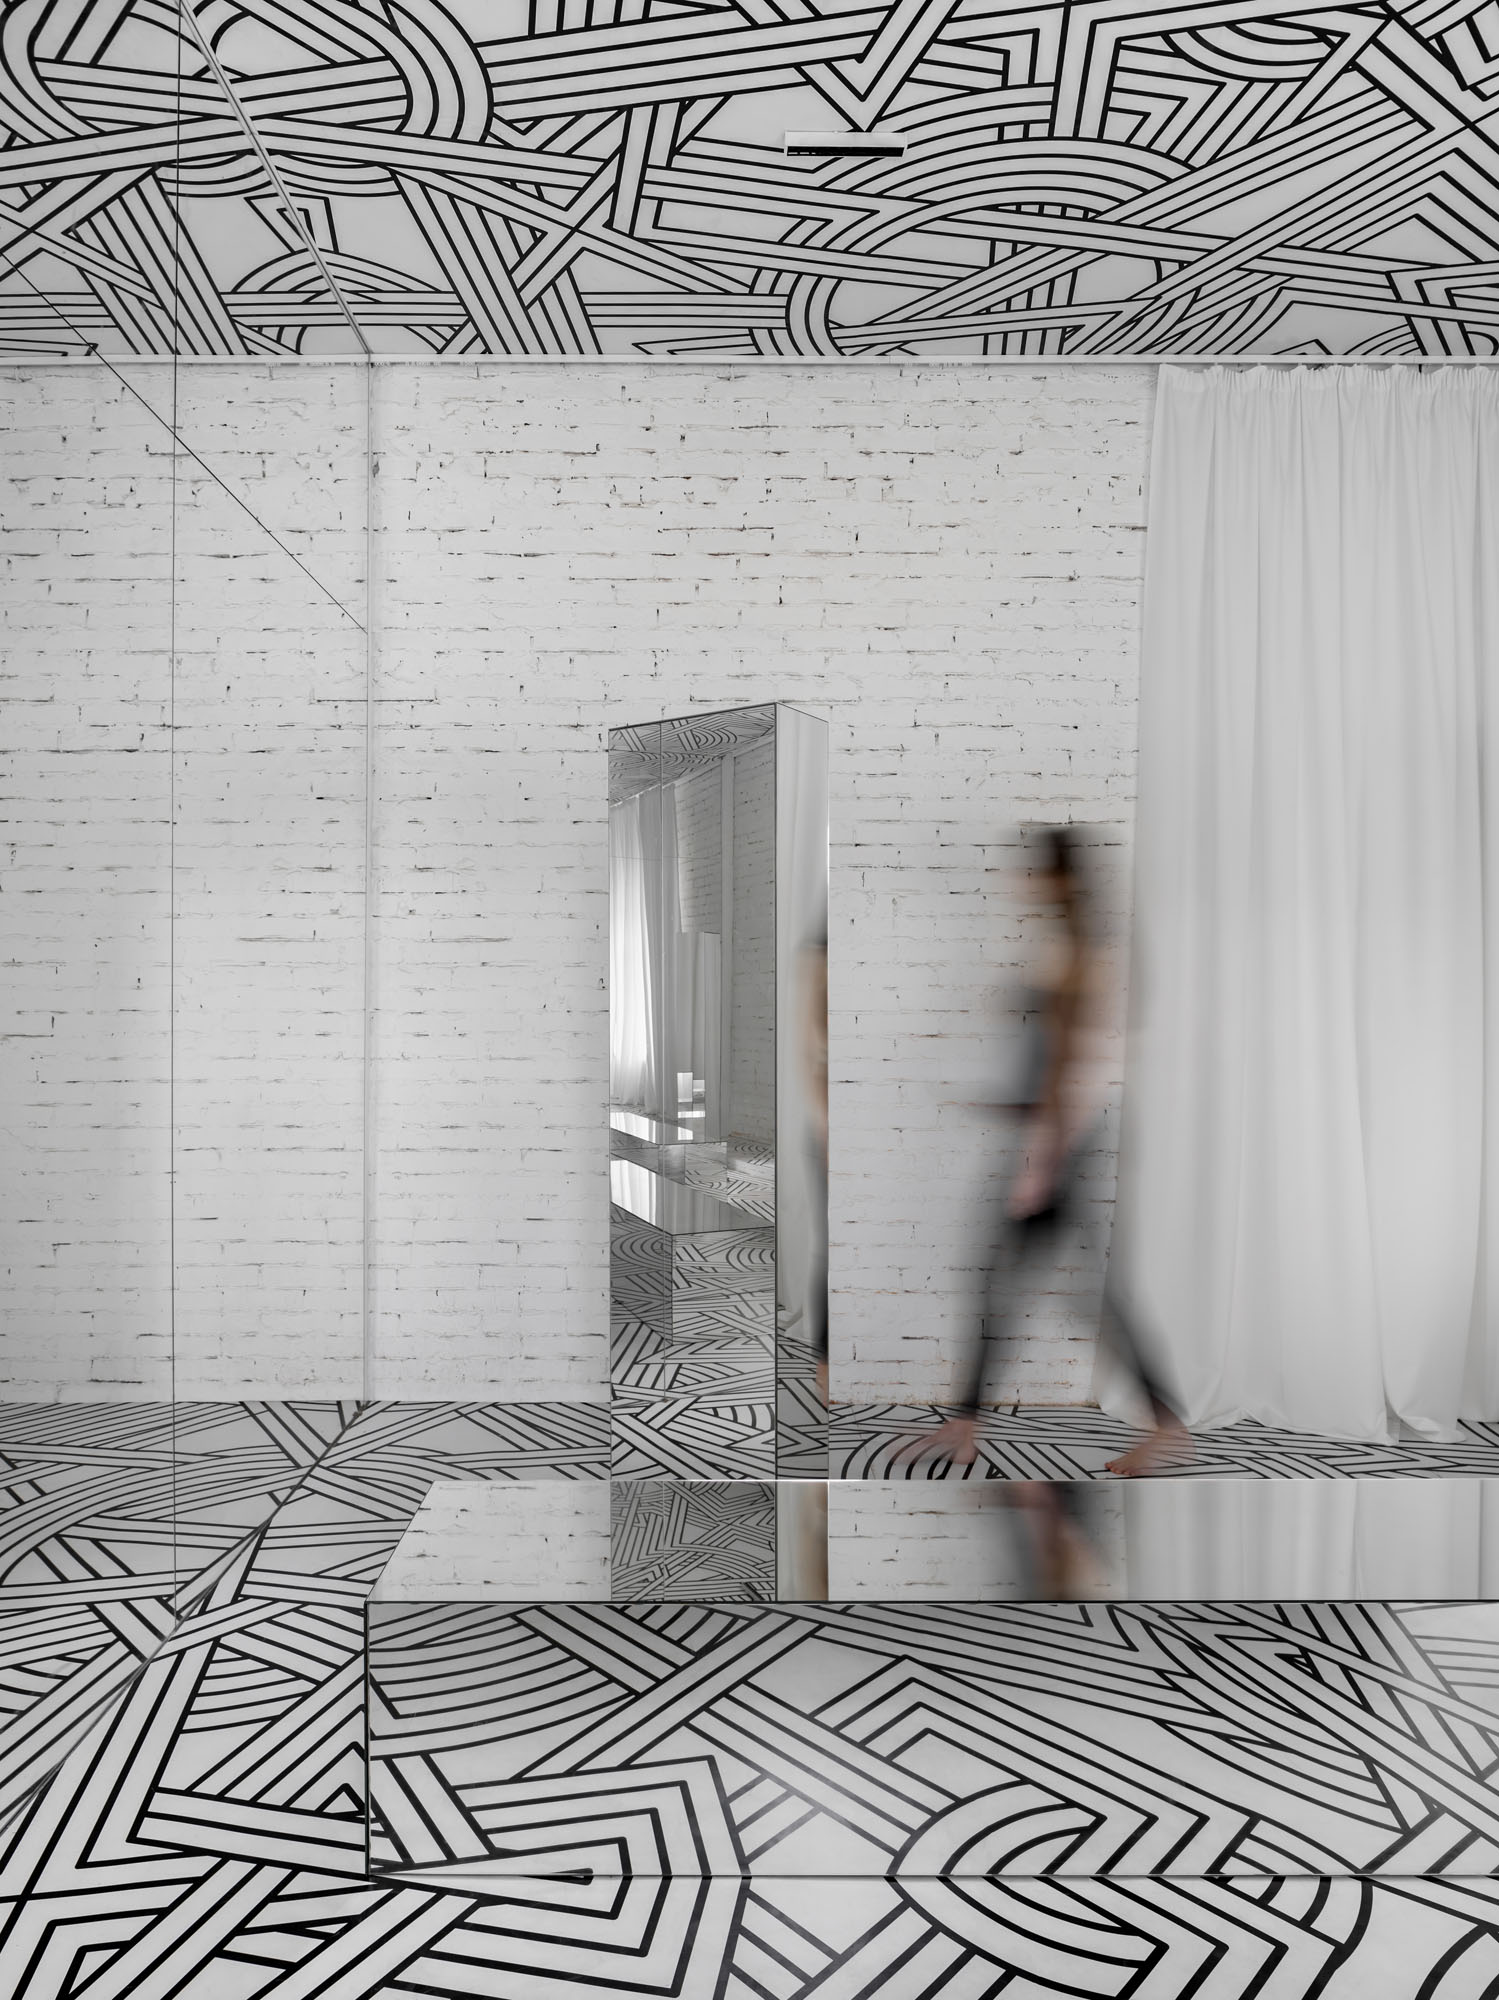 a woman walking past mirrored objects in a hallway with a graphic on the ceiling and floor